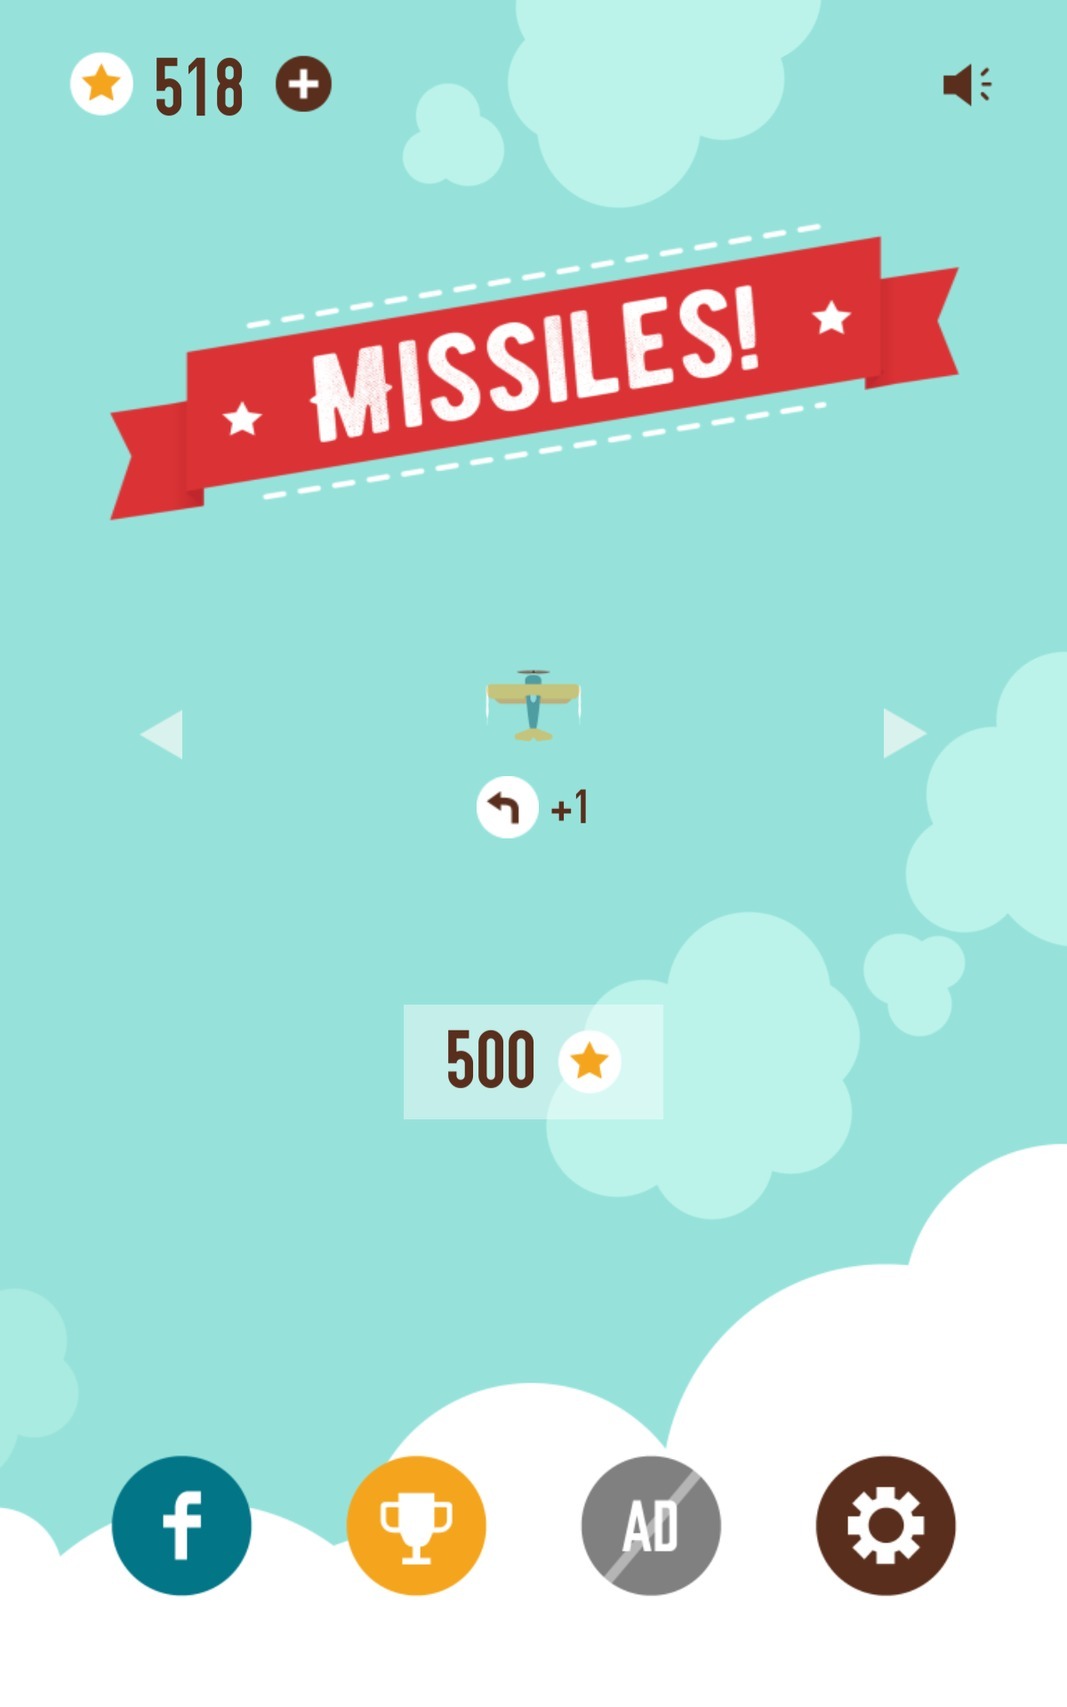 Missiles!